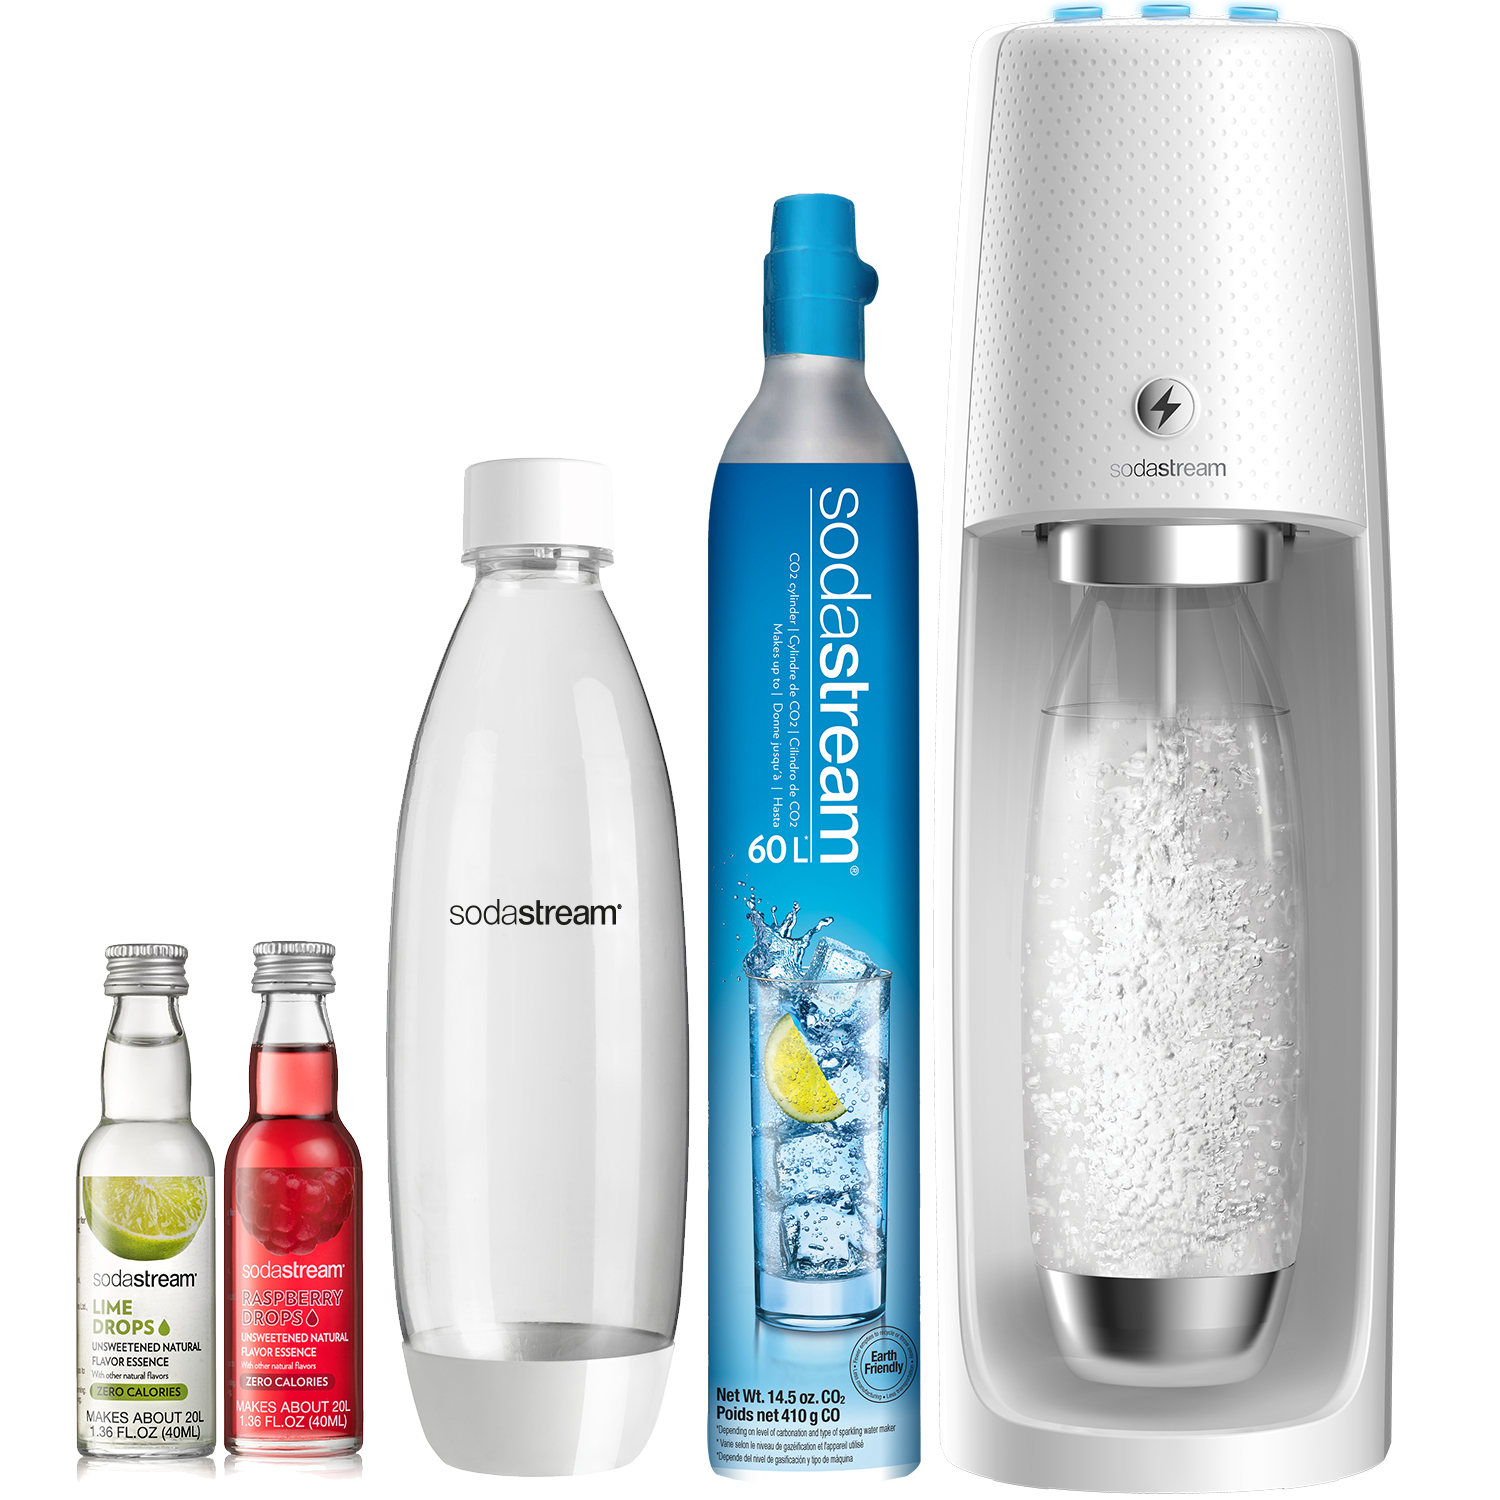 SodaStream One Touch Sparkling Water Maker (White) Bundle with CO2, 2 BPA free Bottles and 2 Fruit Drops - image 1 of 11